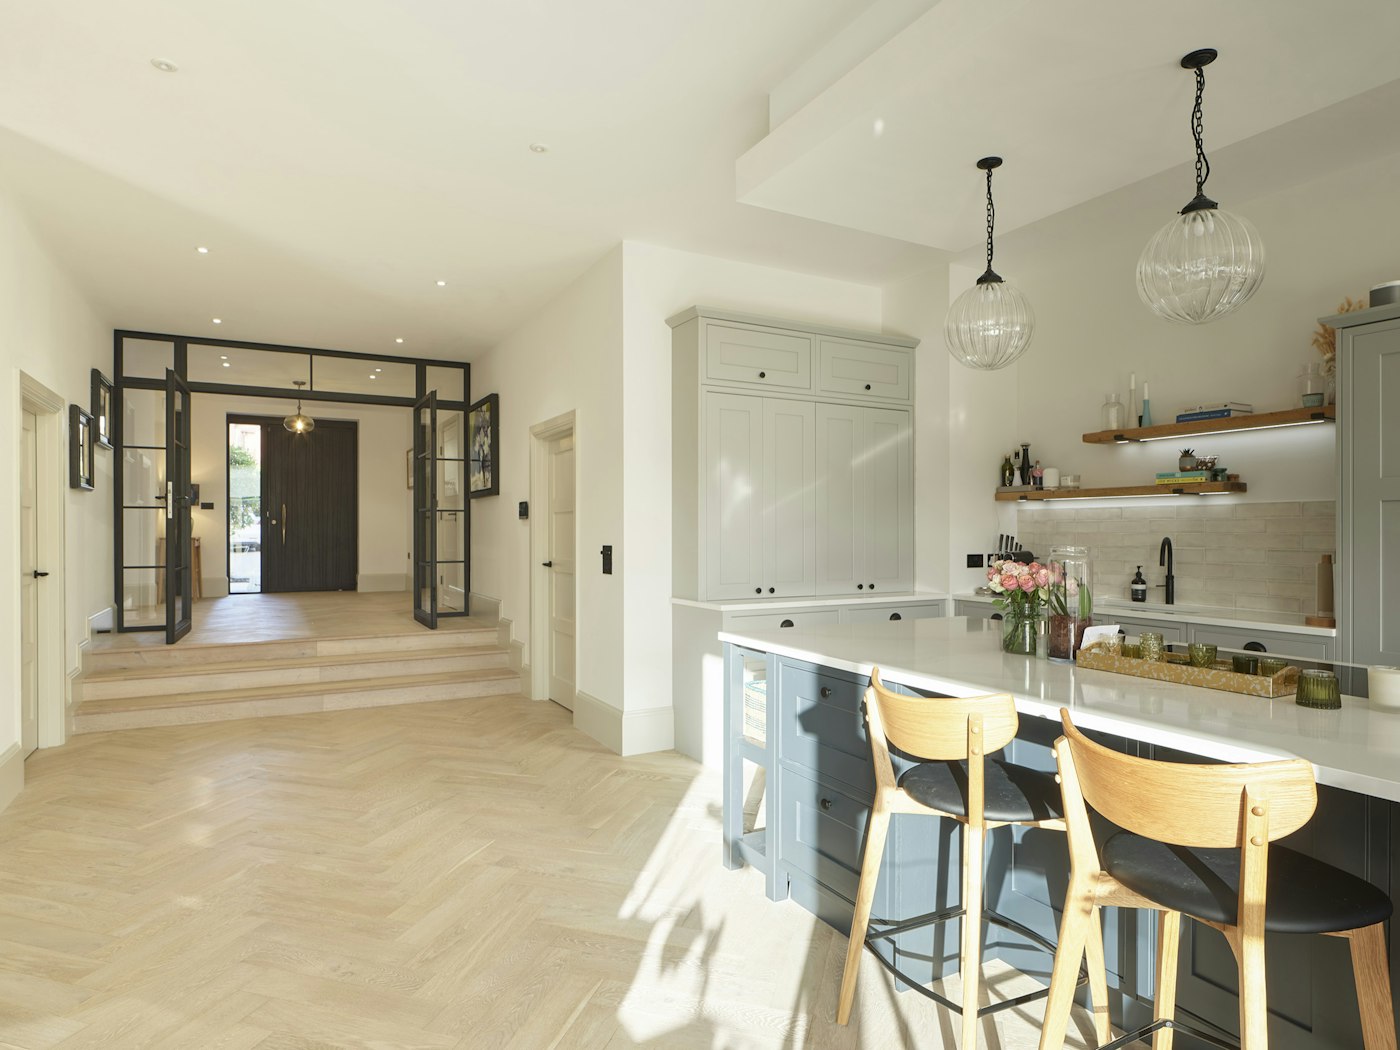 The herringbone flooring and spacious kitchen area make for an inviting space